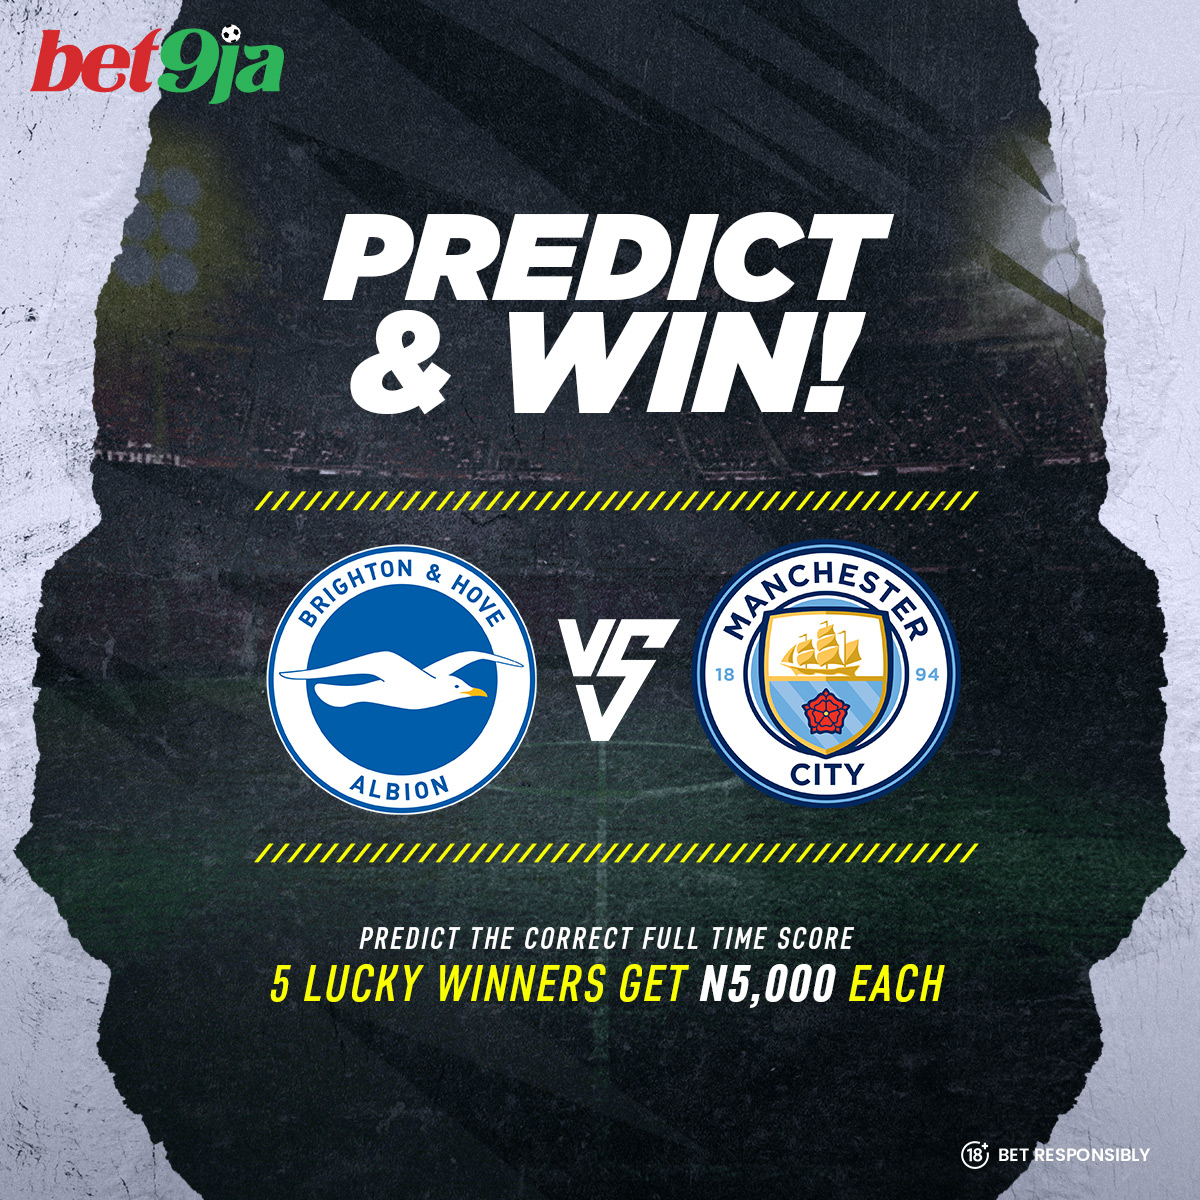 Comment the correct full-time score & your 𝐛𝐞𝐭𝟗𝐣𝐚 𝐈𝐃 and stand a chance to win N5,000

All predictions end on Thursday 25th April 2024 at 6:00 pm

Multiple and/or edited comments will be disqualified.

Five winners will be selected at random

#Bet9jaPredictAndwin